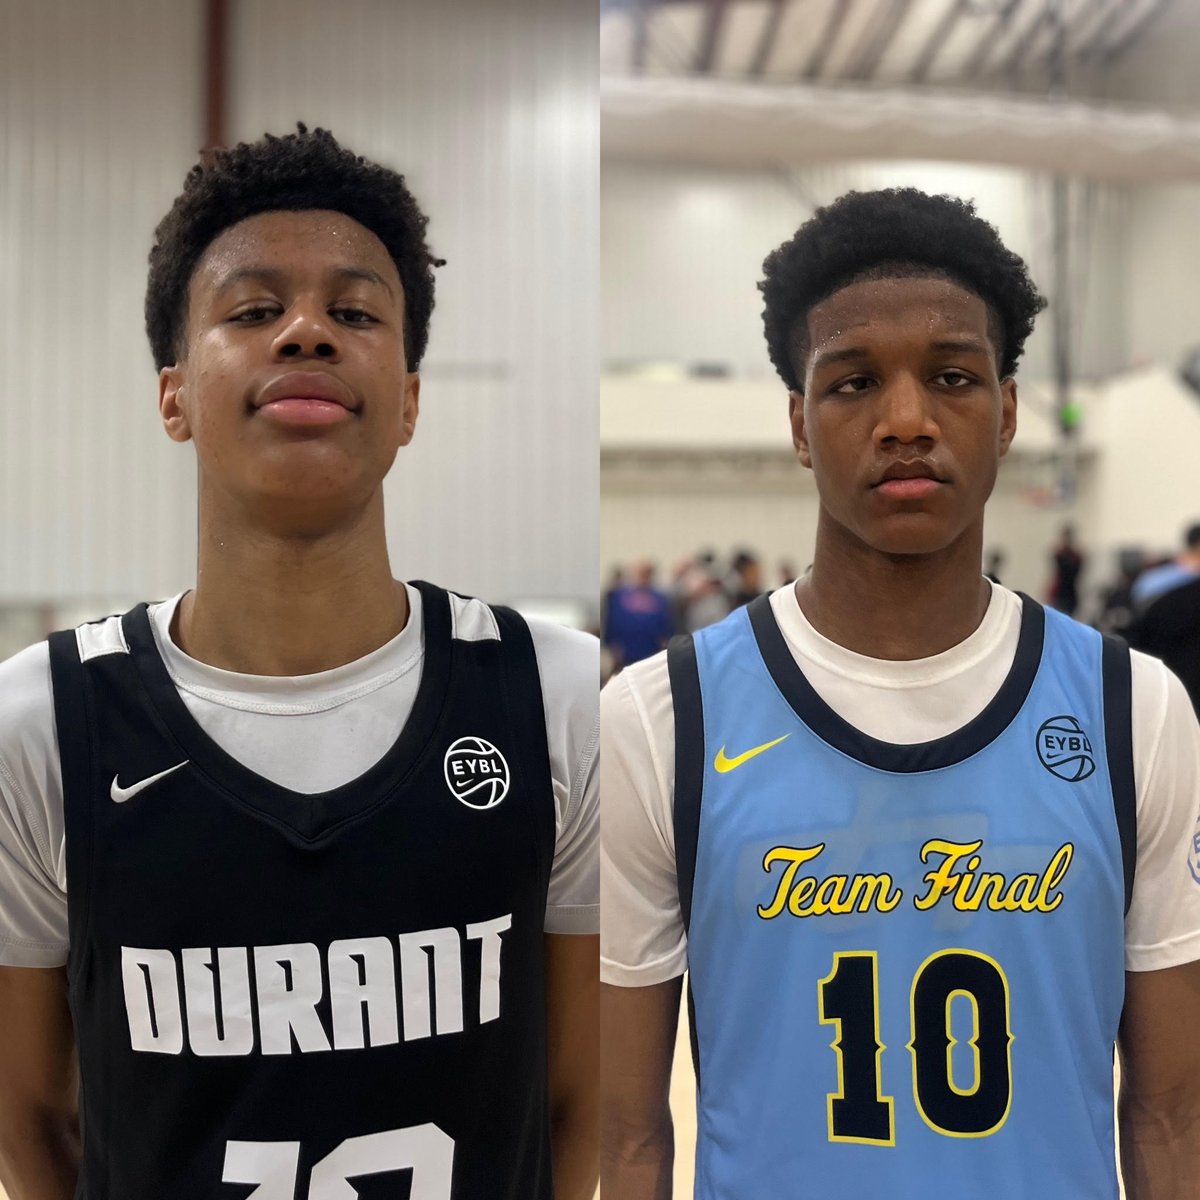 The future of HS 🏀 in the Mid-Atlantic region is in good hands. Zooming in on some standouts from 15-16U age groups from @madehoops East Warmup 👉✍️: madehoops.com/made-society/a…